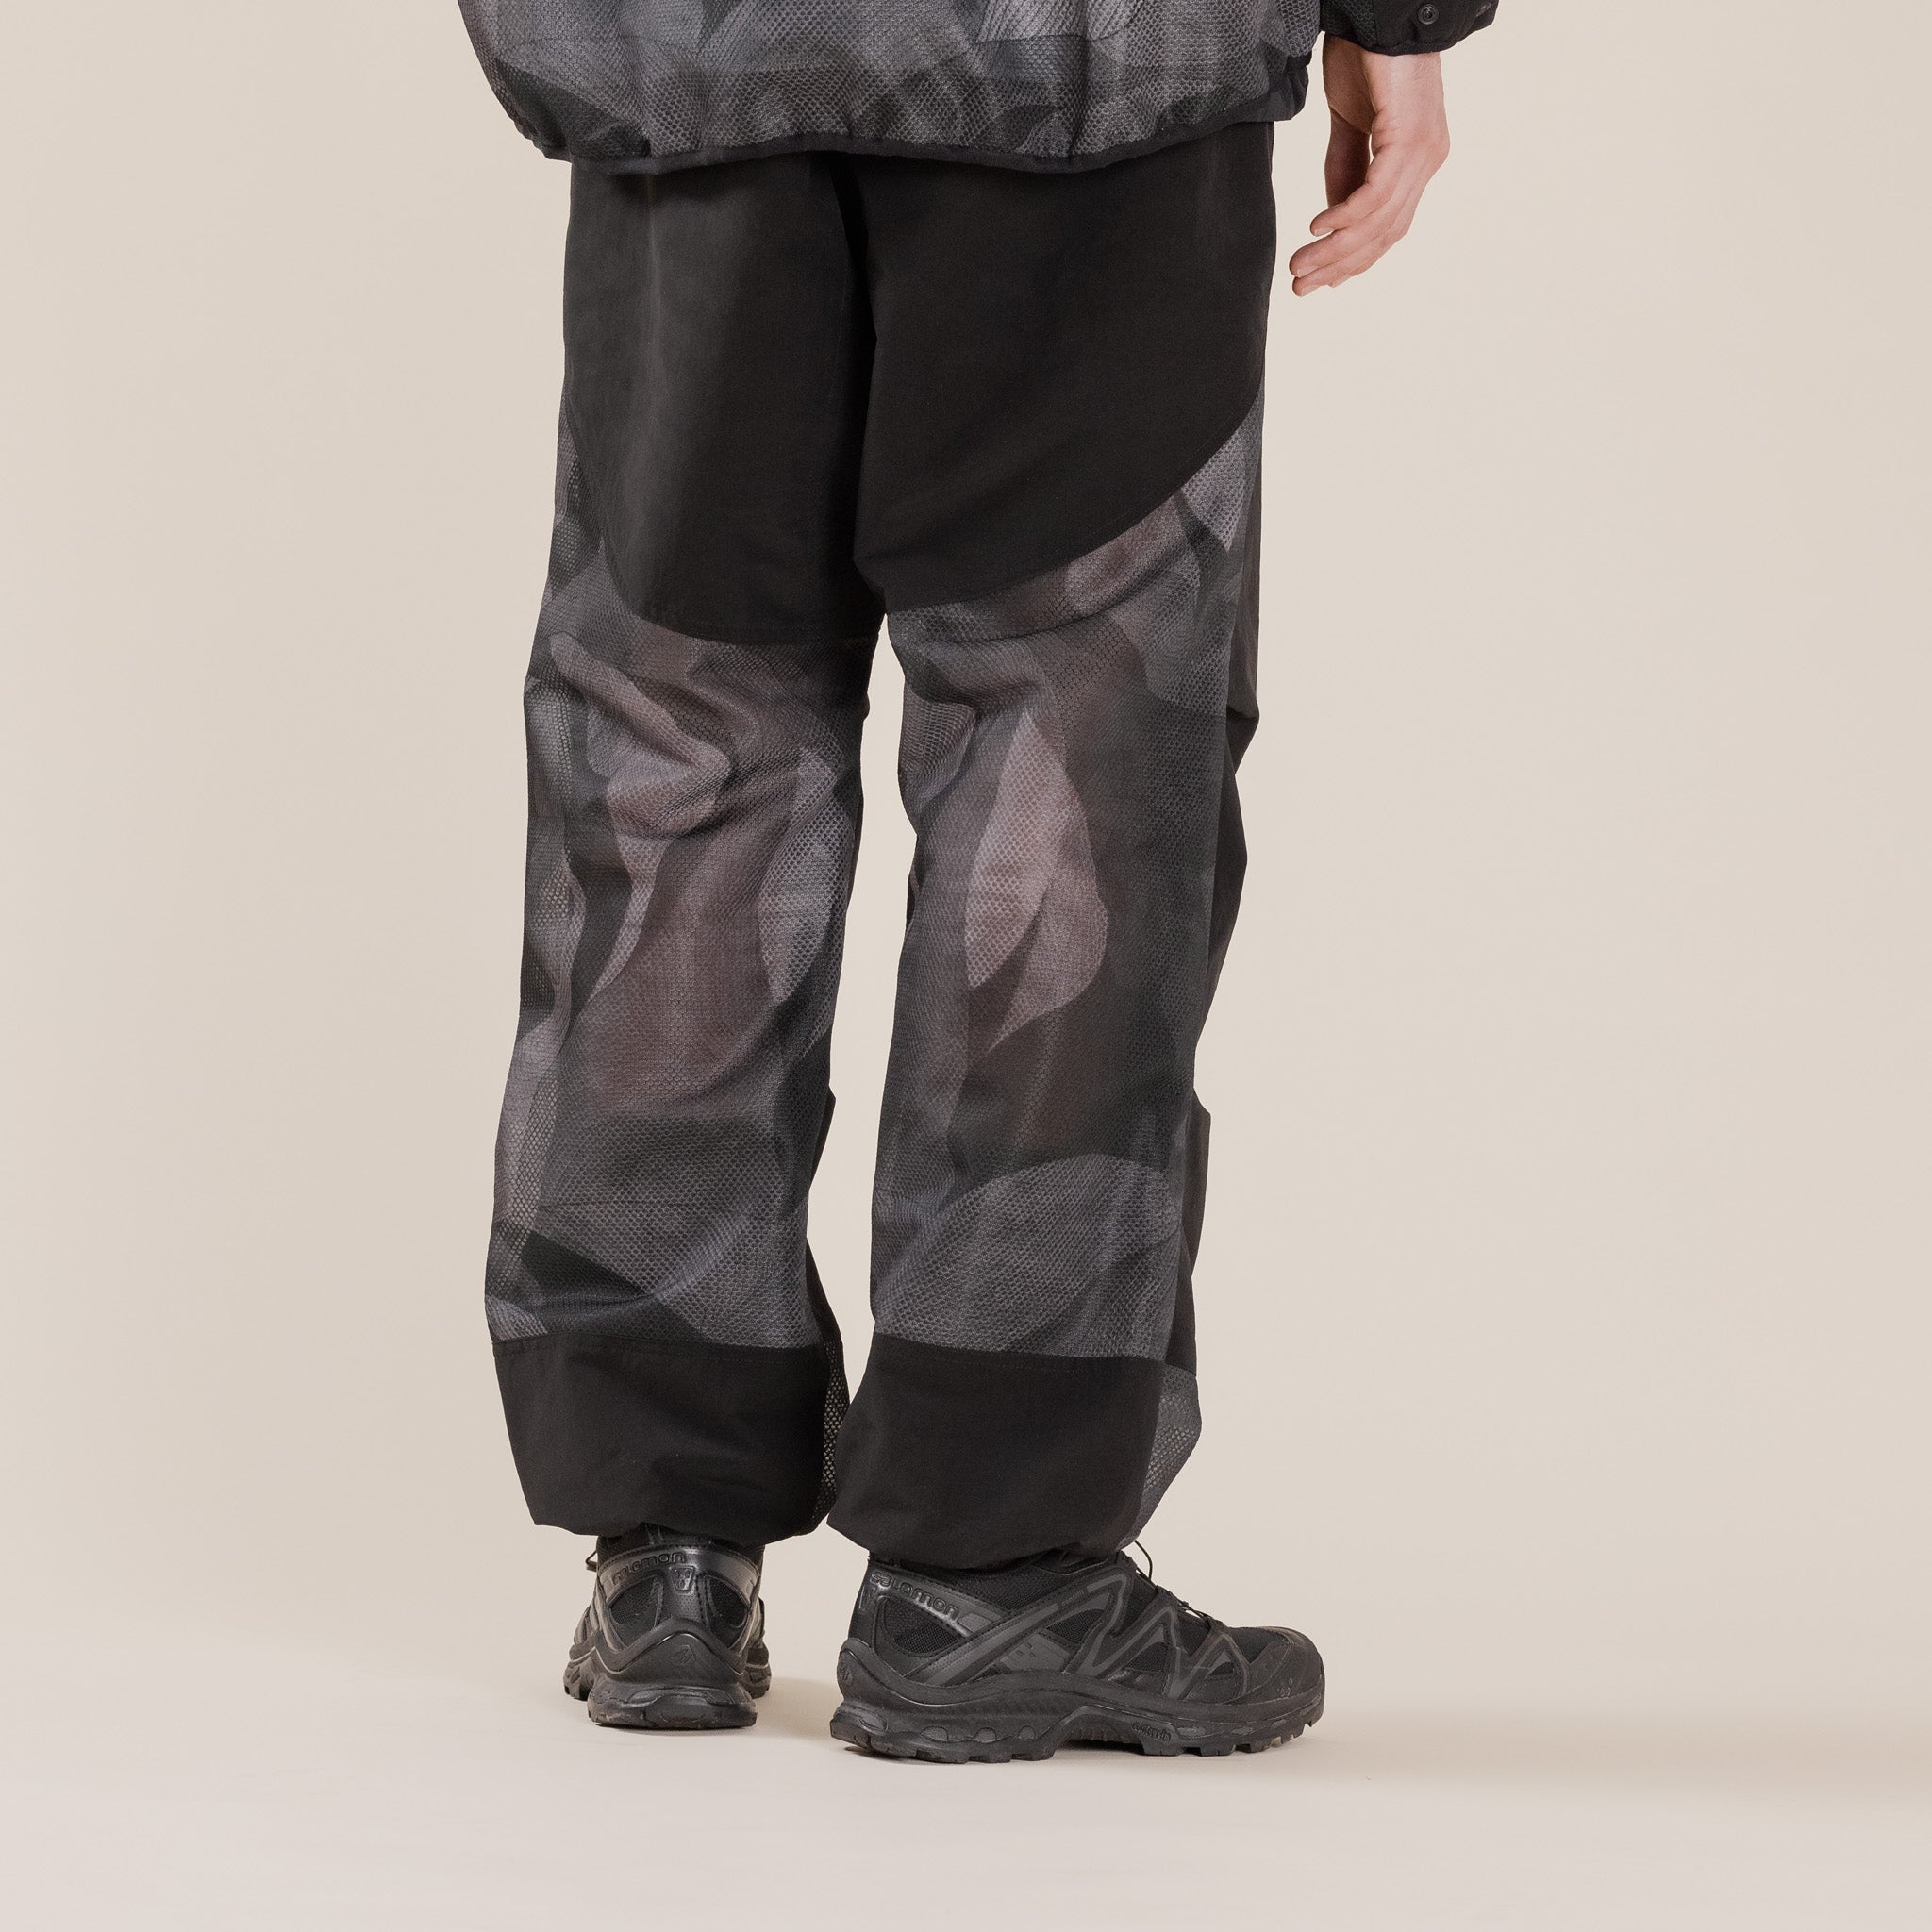 This Thing Of Ours x Norbit by Hiroshi Nozawa - Insect Shield Pants - A/C Black Grey Exclusive Collaboration